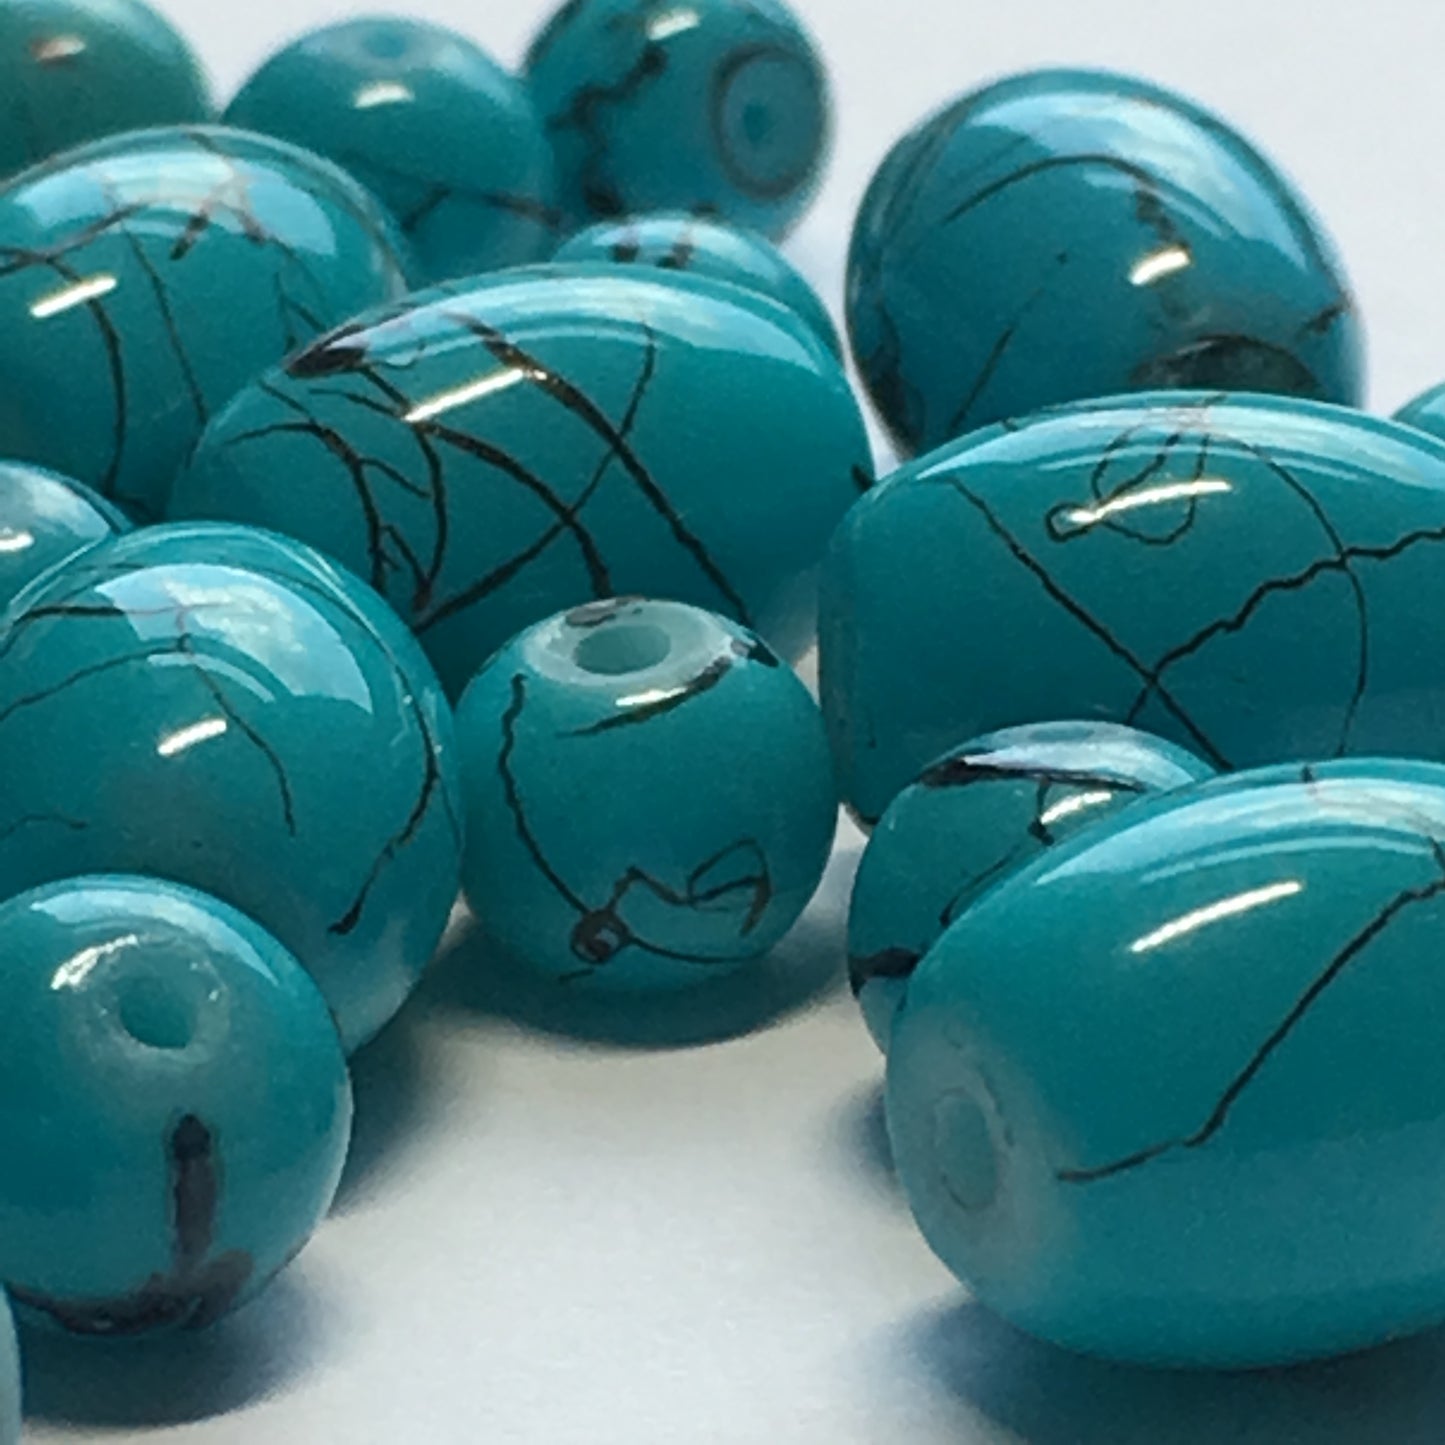 Turquoise Glass Beads, 11 x 8 mm Barrels (12) and 6 mm Rounds (46)